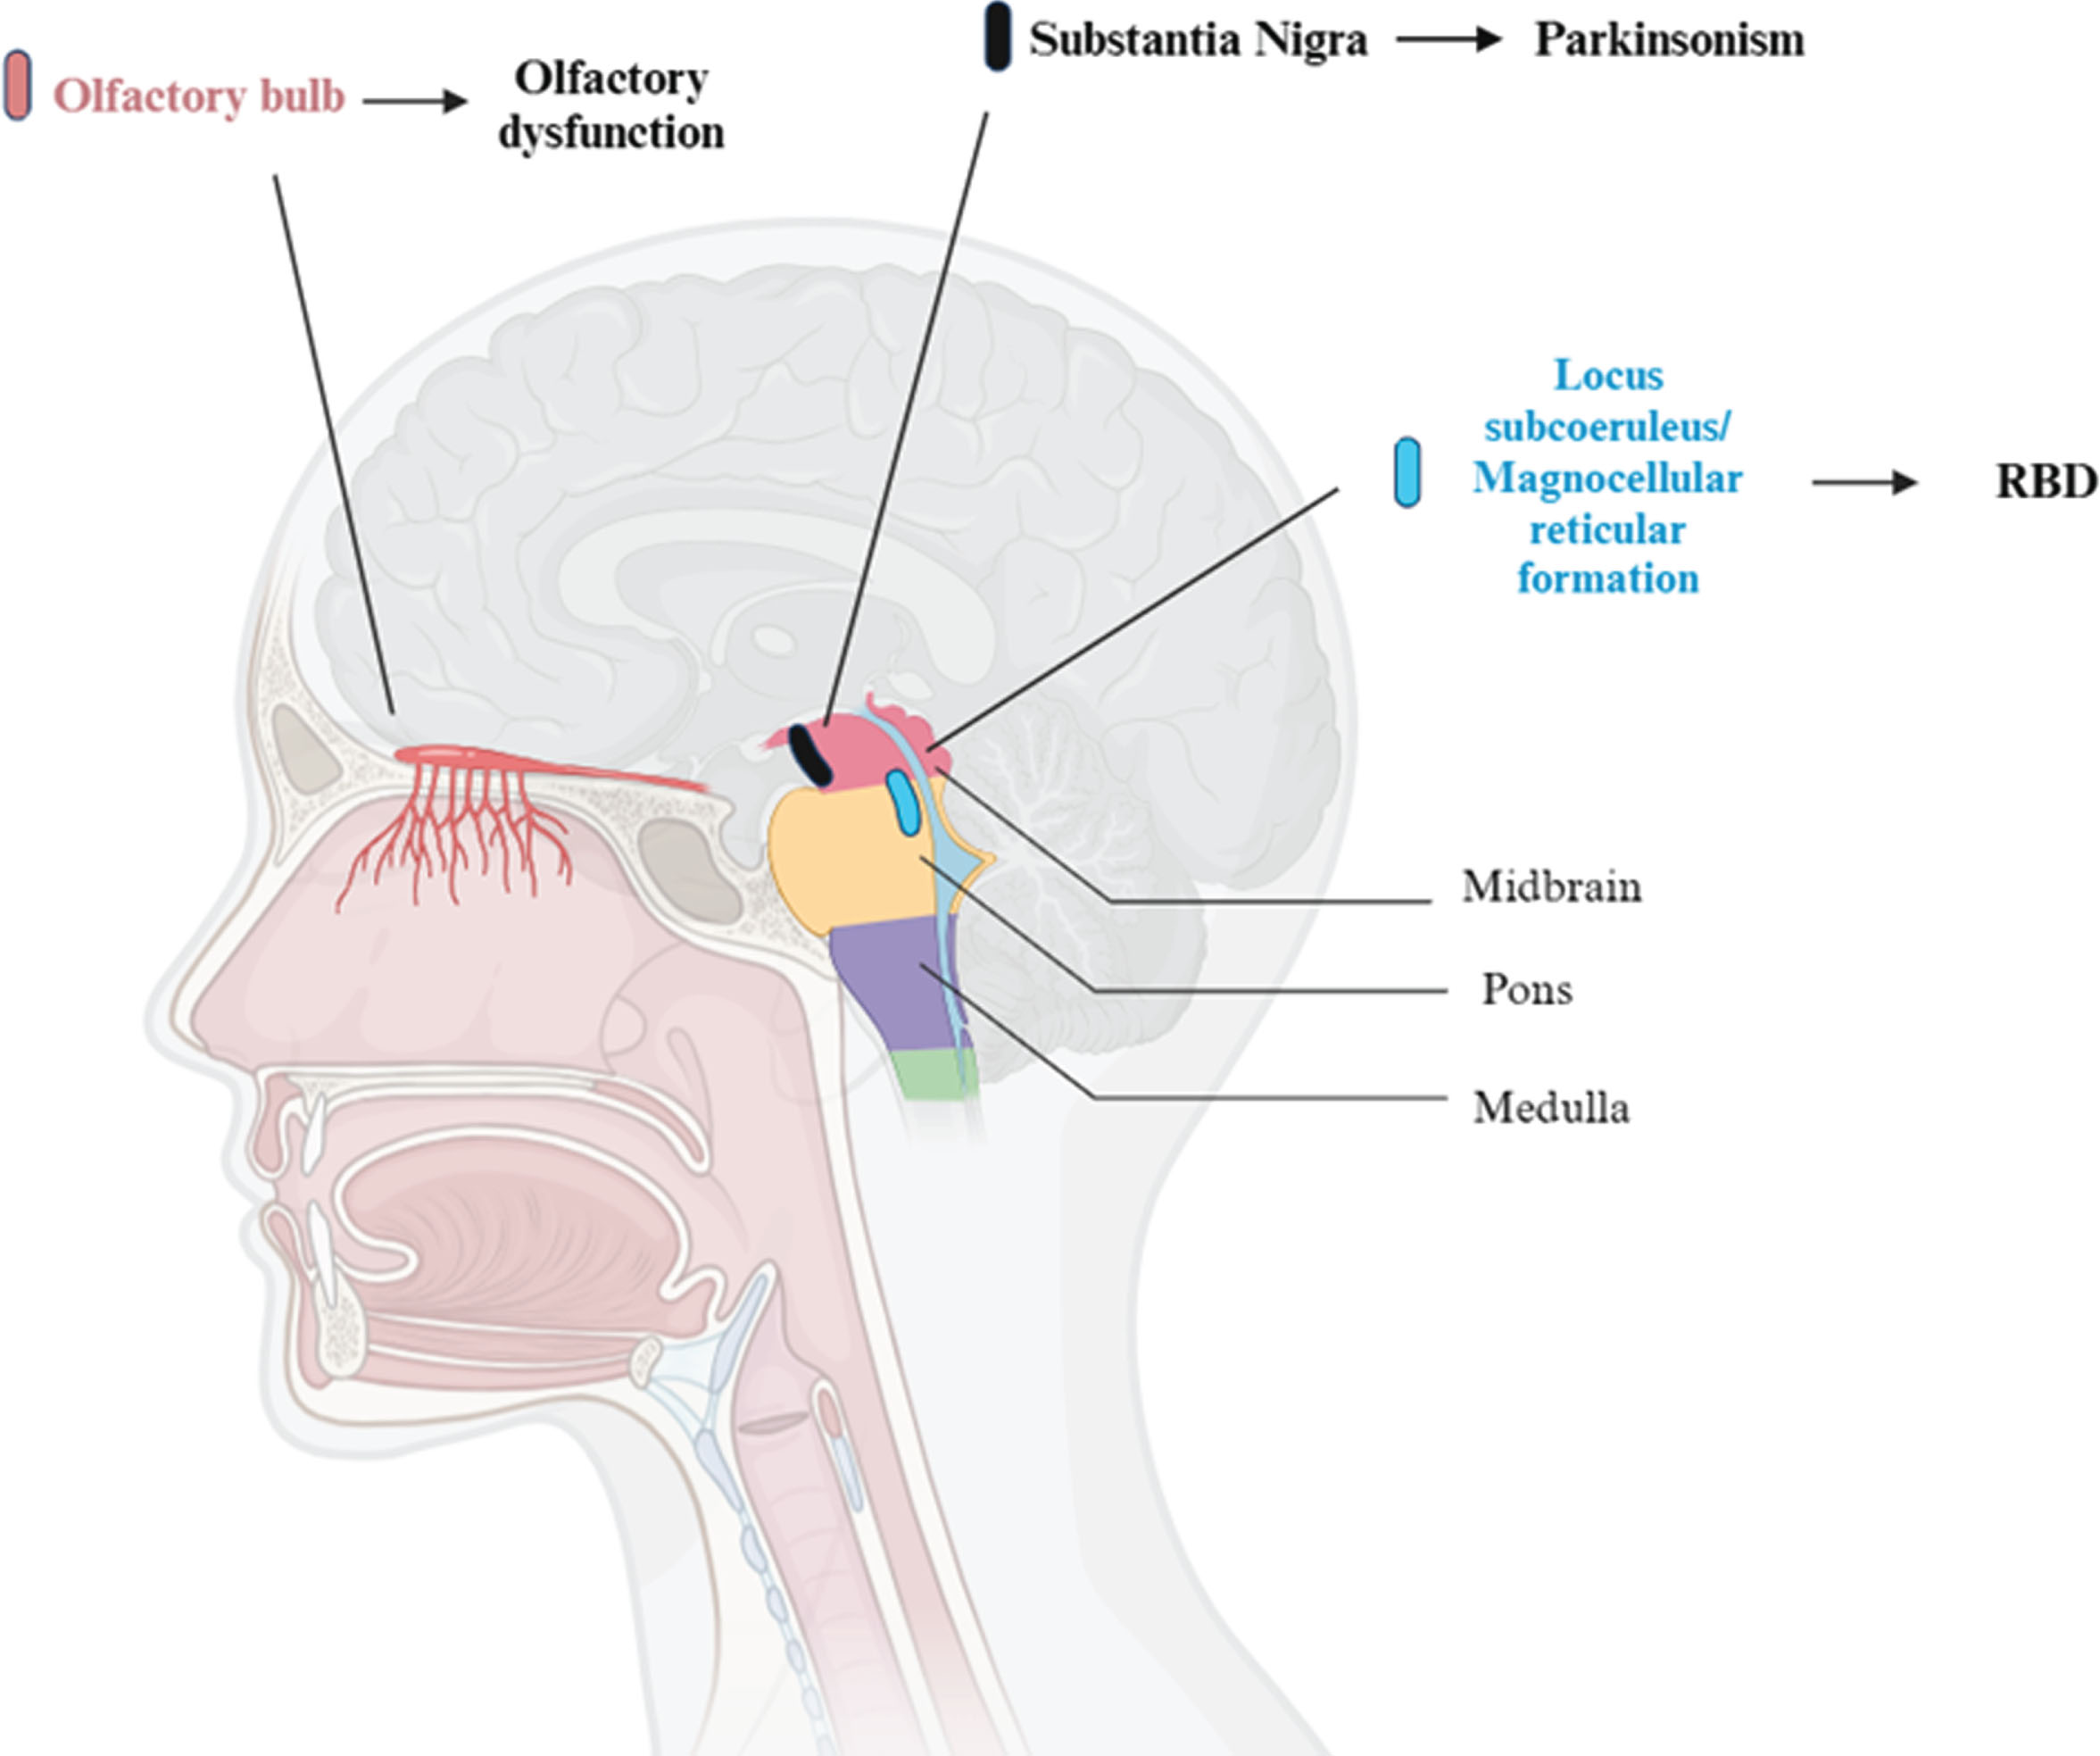 Brain areas involved in olfactory dysfunction, REM Behavior Disorder (RBD) and parkinsonism. So far, most of the research on this topic has been conduct on animals. This figure represents the human equivalent of regions in animal models, mainly in rats and cats. For what concerns REM motor control centers, in particular, the sublaterodorsalis nucleus (rats) and the peri-locus coeruleus alpha (cats) are responsible for muscle atonia in REM sleep. These regions correspond to the locus subcoeruleus and the magnocellular reticular formation area in humans.